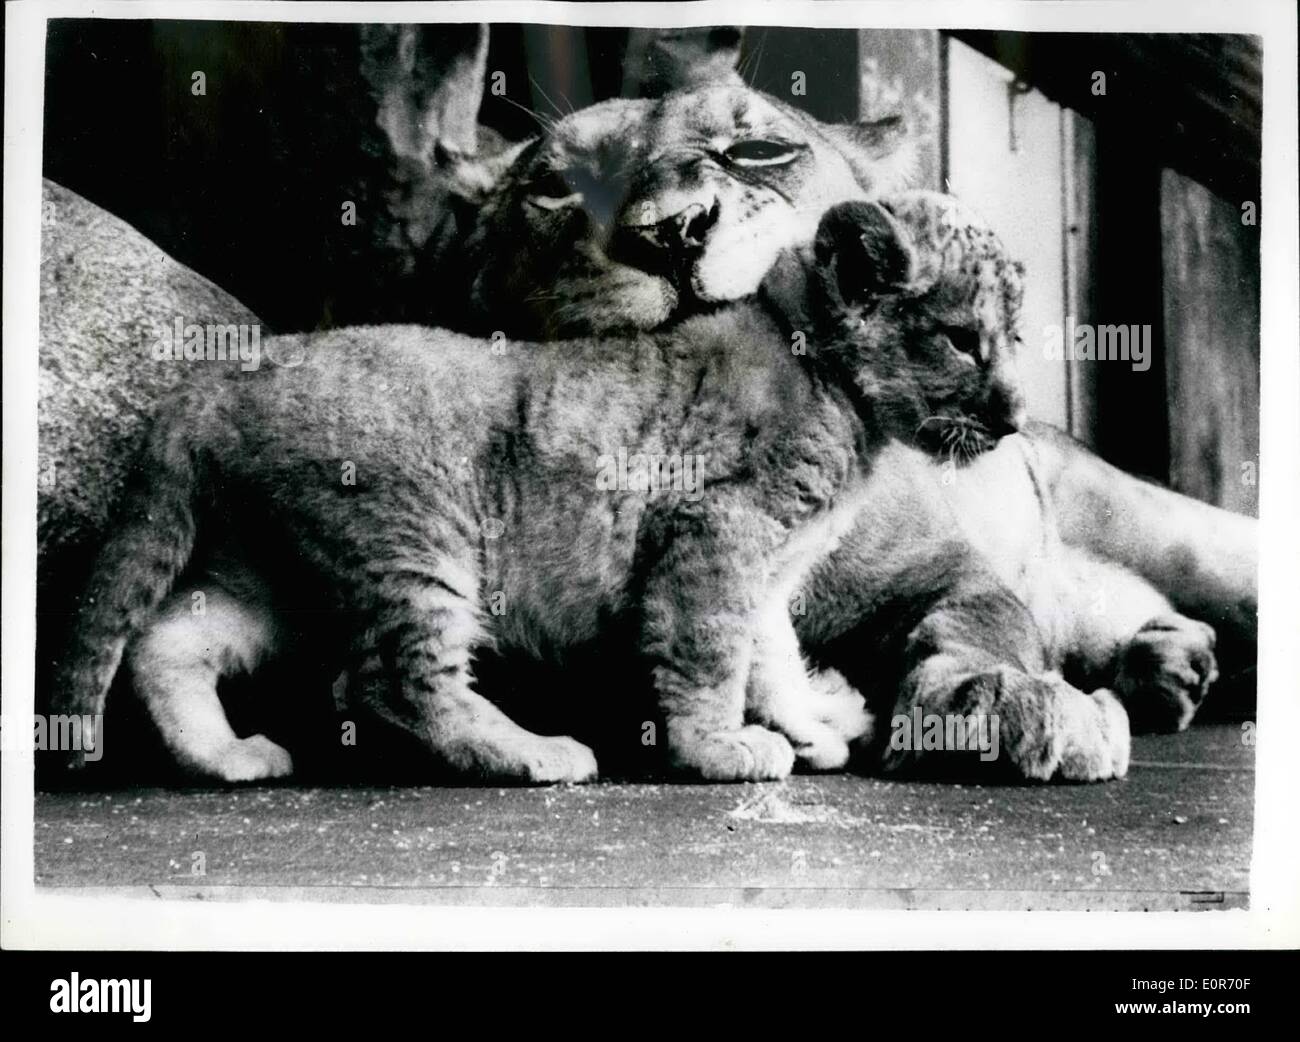 May 05, 1958 - The Baby is Very Cuddle some - Burt Beware Of Mum..Lion Cub At Copenhagen Zoo: A very forbidding expression on the face of lioness Rumo as she taken things easy in her cage at the Copenhagen Zoo - with her few days old Cub - the newest and most popular attraction to the zoo. Stock Photo